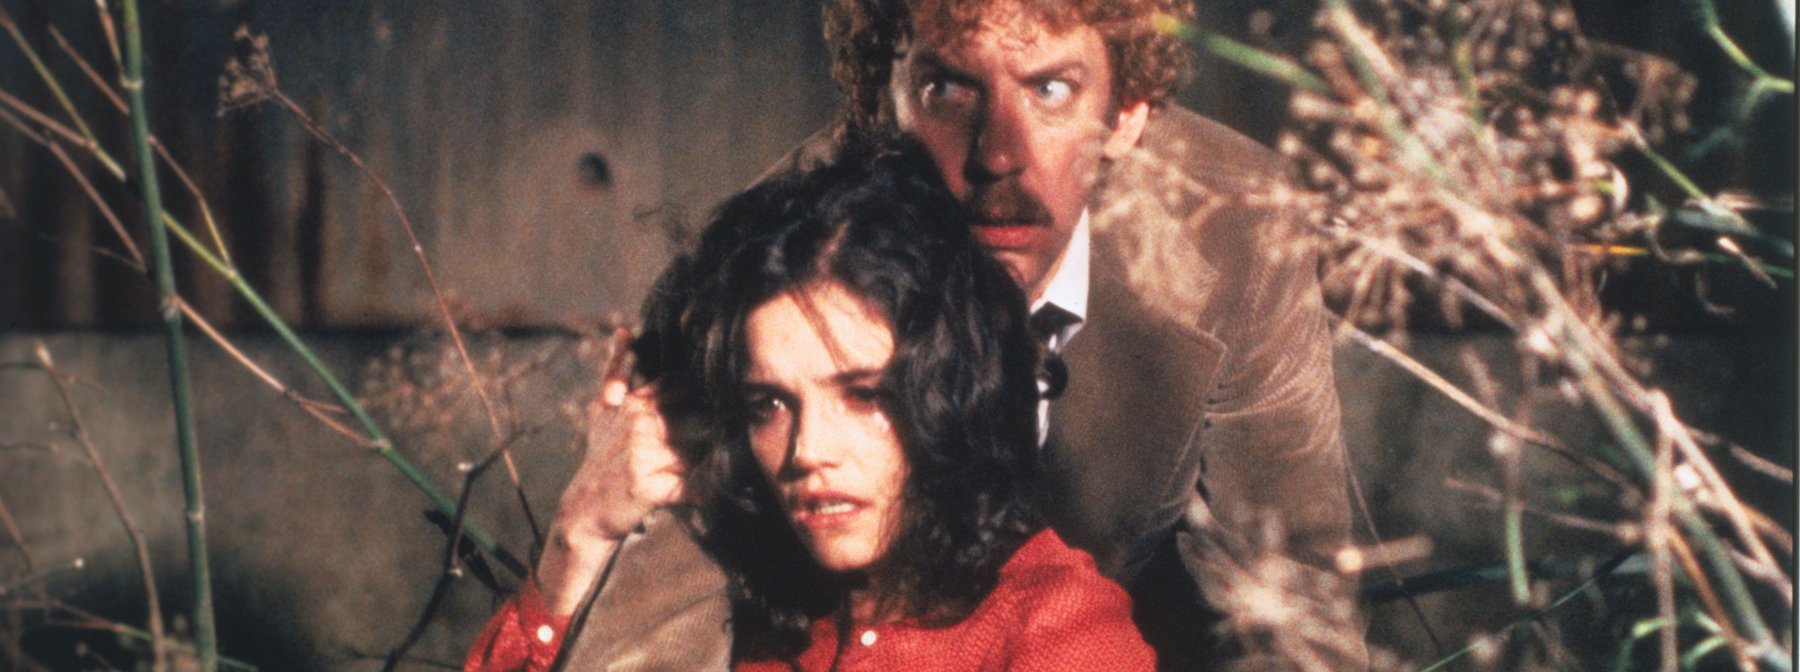 In Pod We Trust: Revisiting Invasion of the Body Snatchers